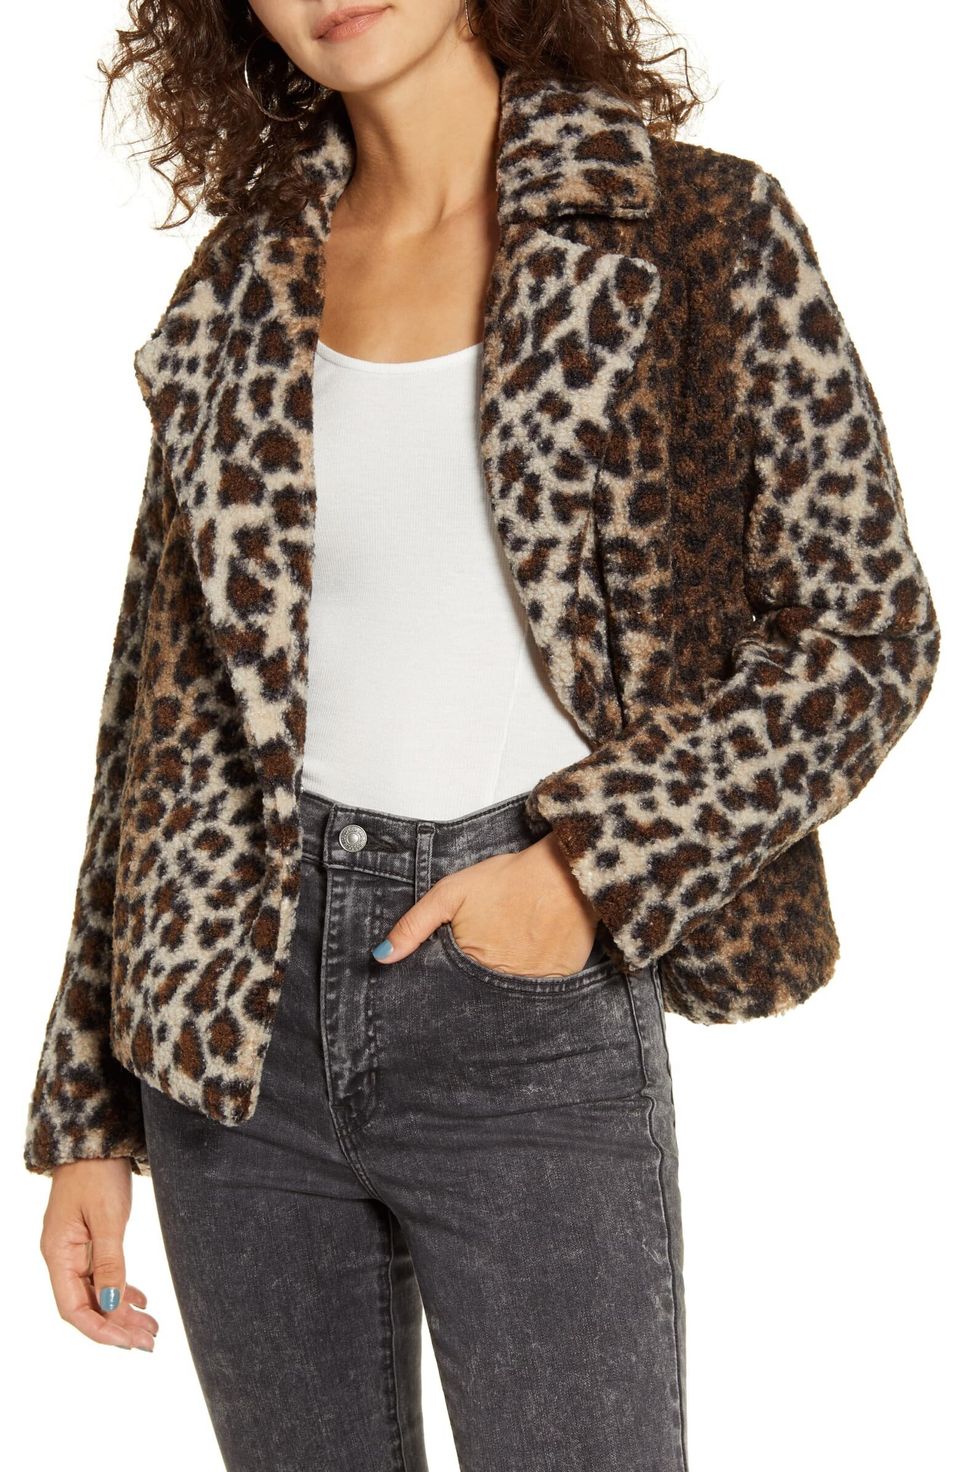 There's A Lot Of Leopard Print On Sale At The Nordstrom Half-Yearly ...